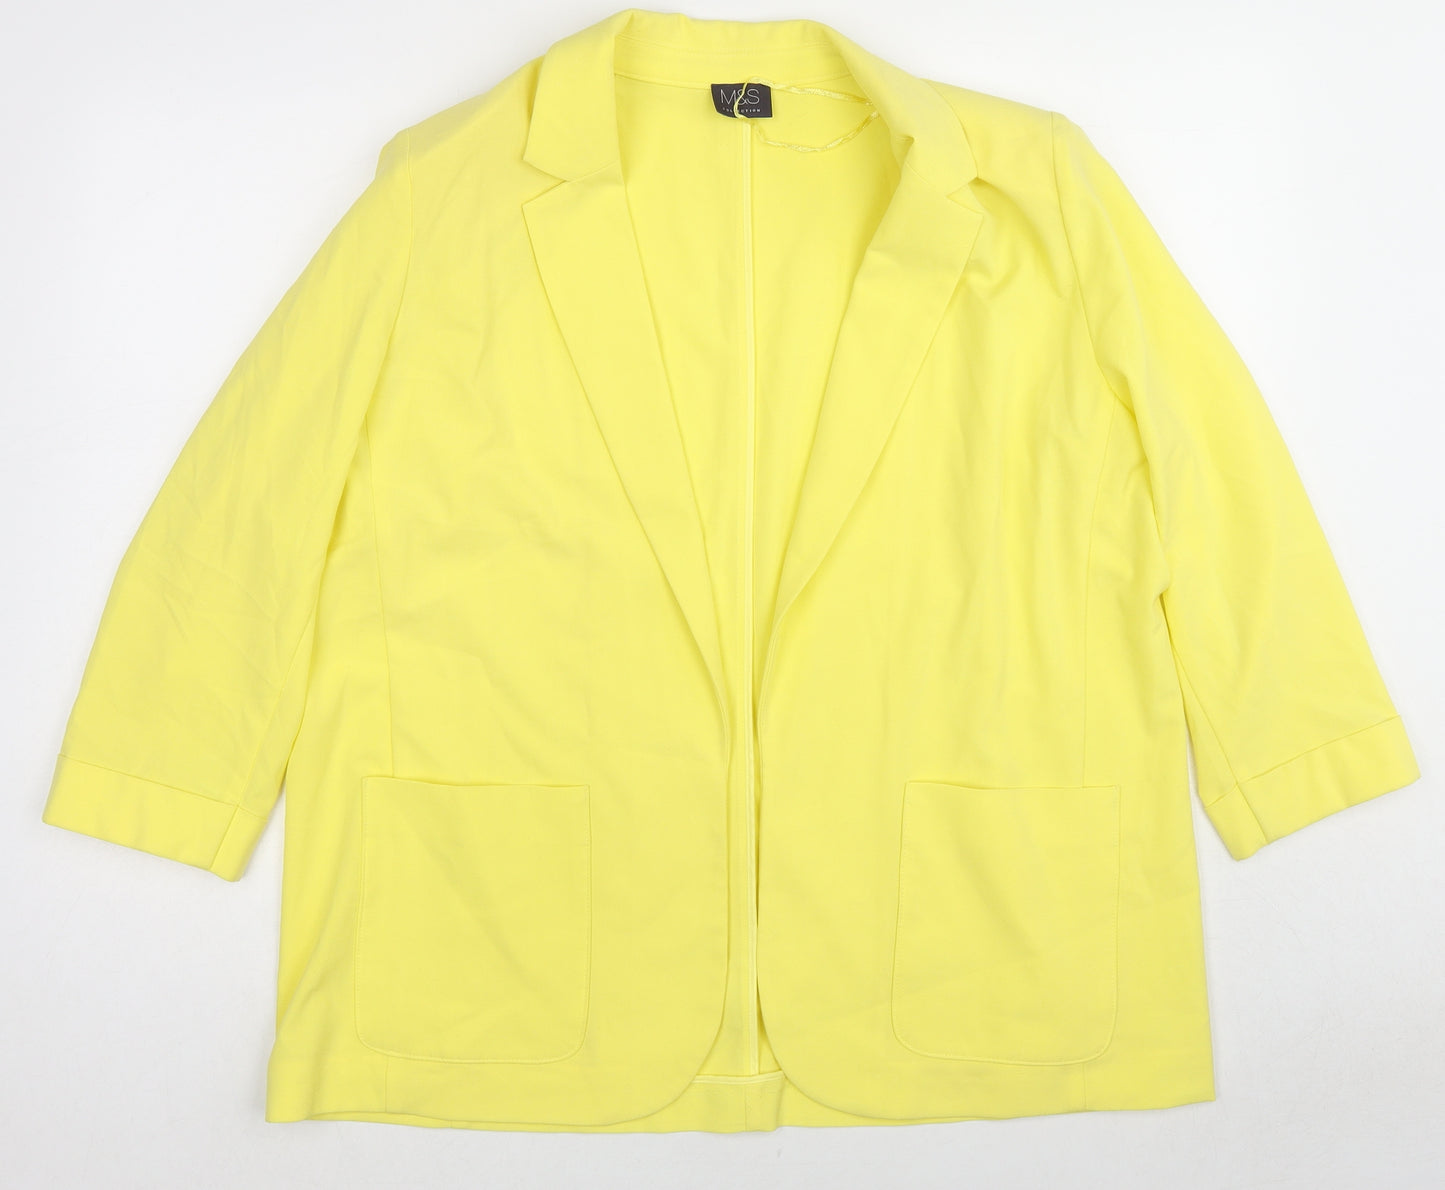 Marks and Spencer Womens Yellow Jacket Blazer Size 18